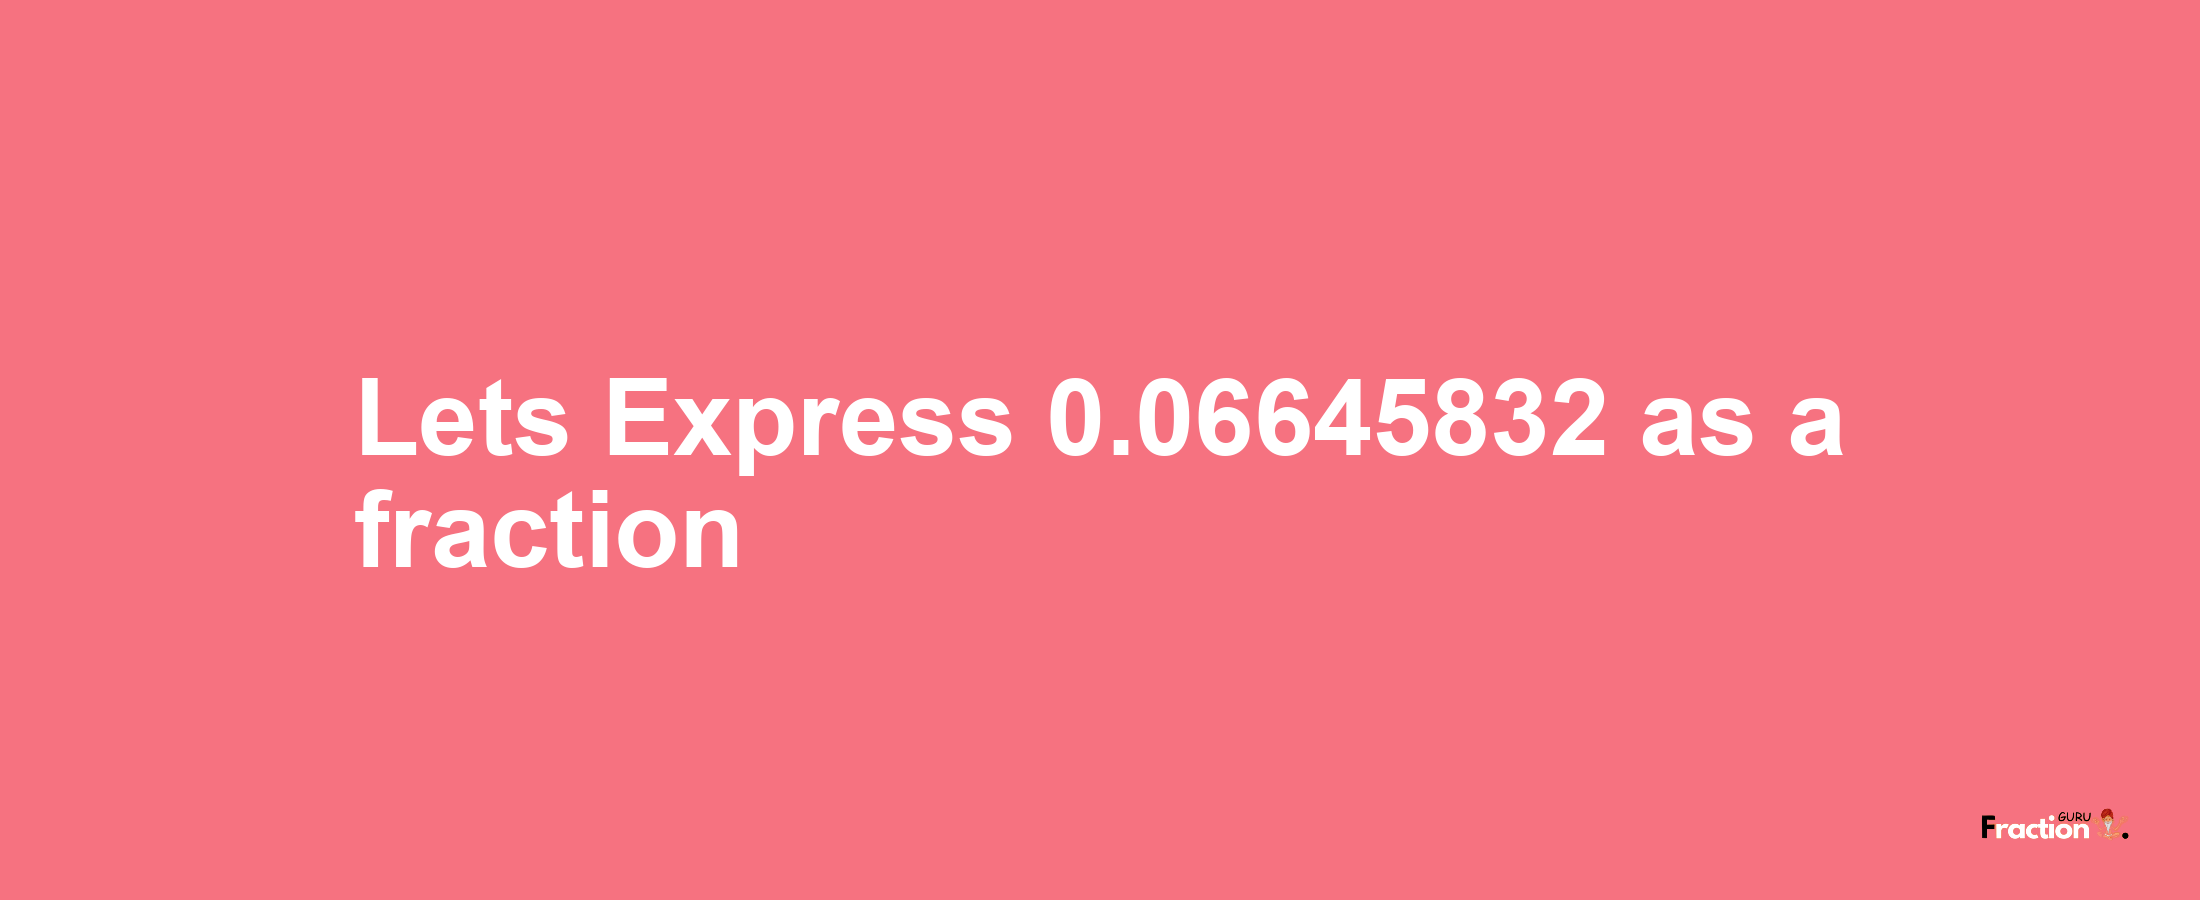 Lets Express 0.06645832 as afraction